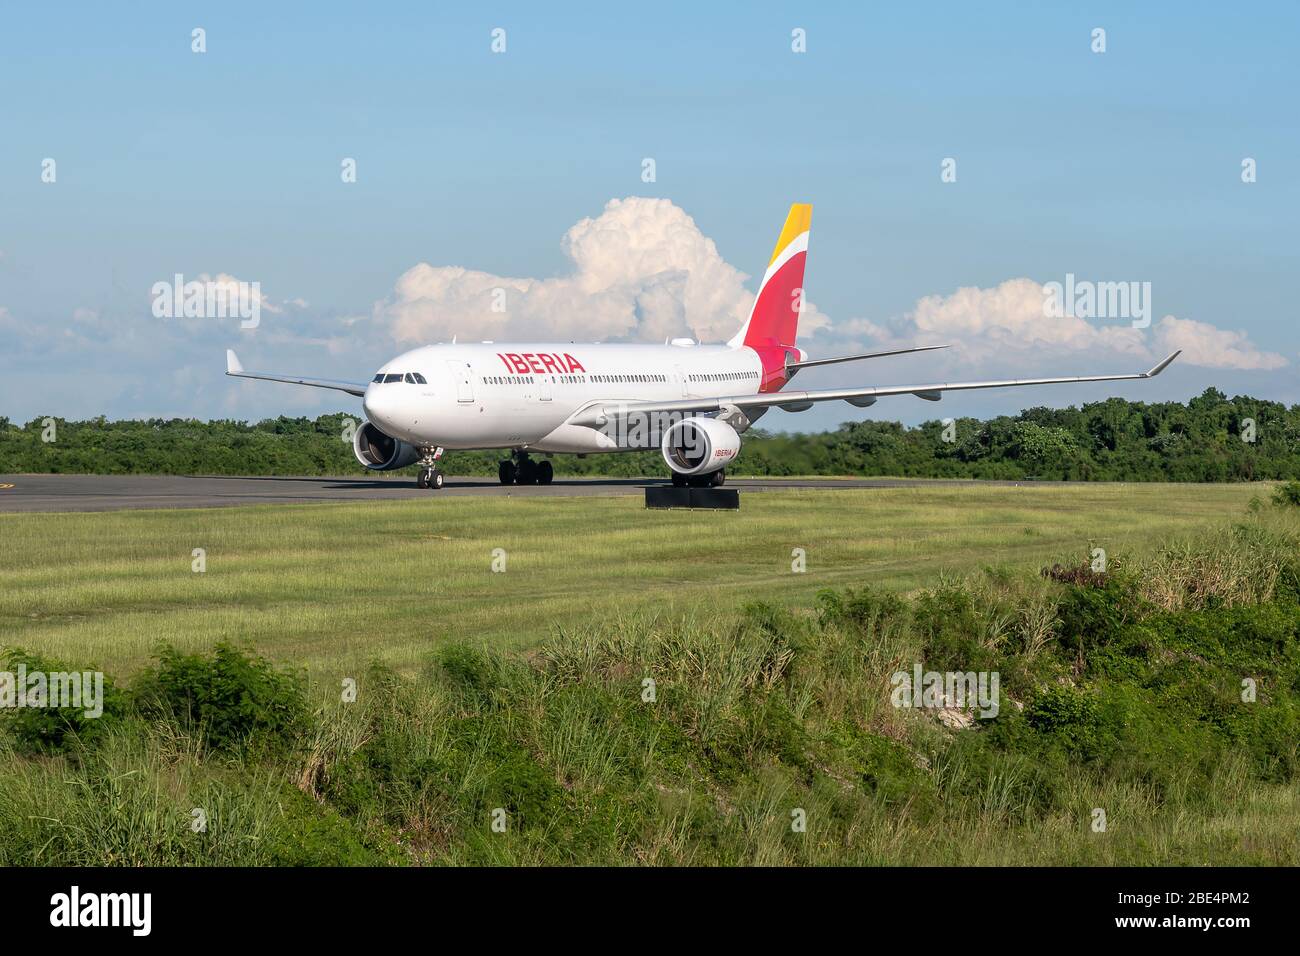 Frankfurt Germany 18.11.19 Iberia spanish Airline airplane jet being starting on the airport ready for takeoff. Stock Photo